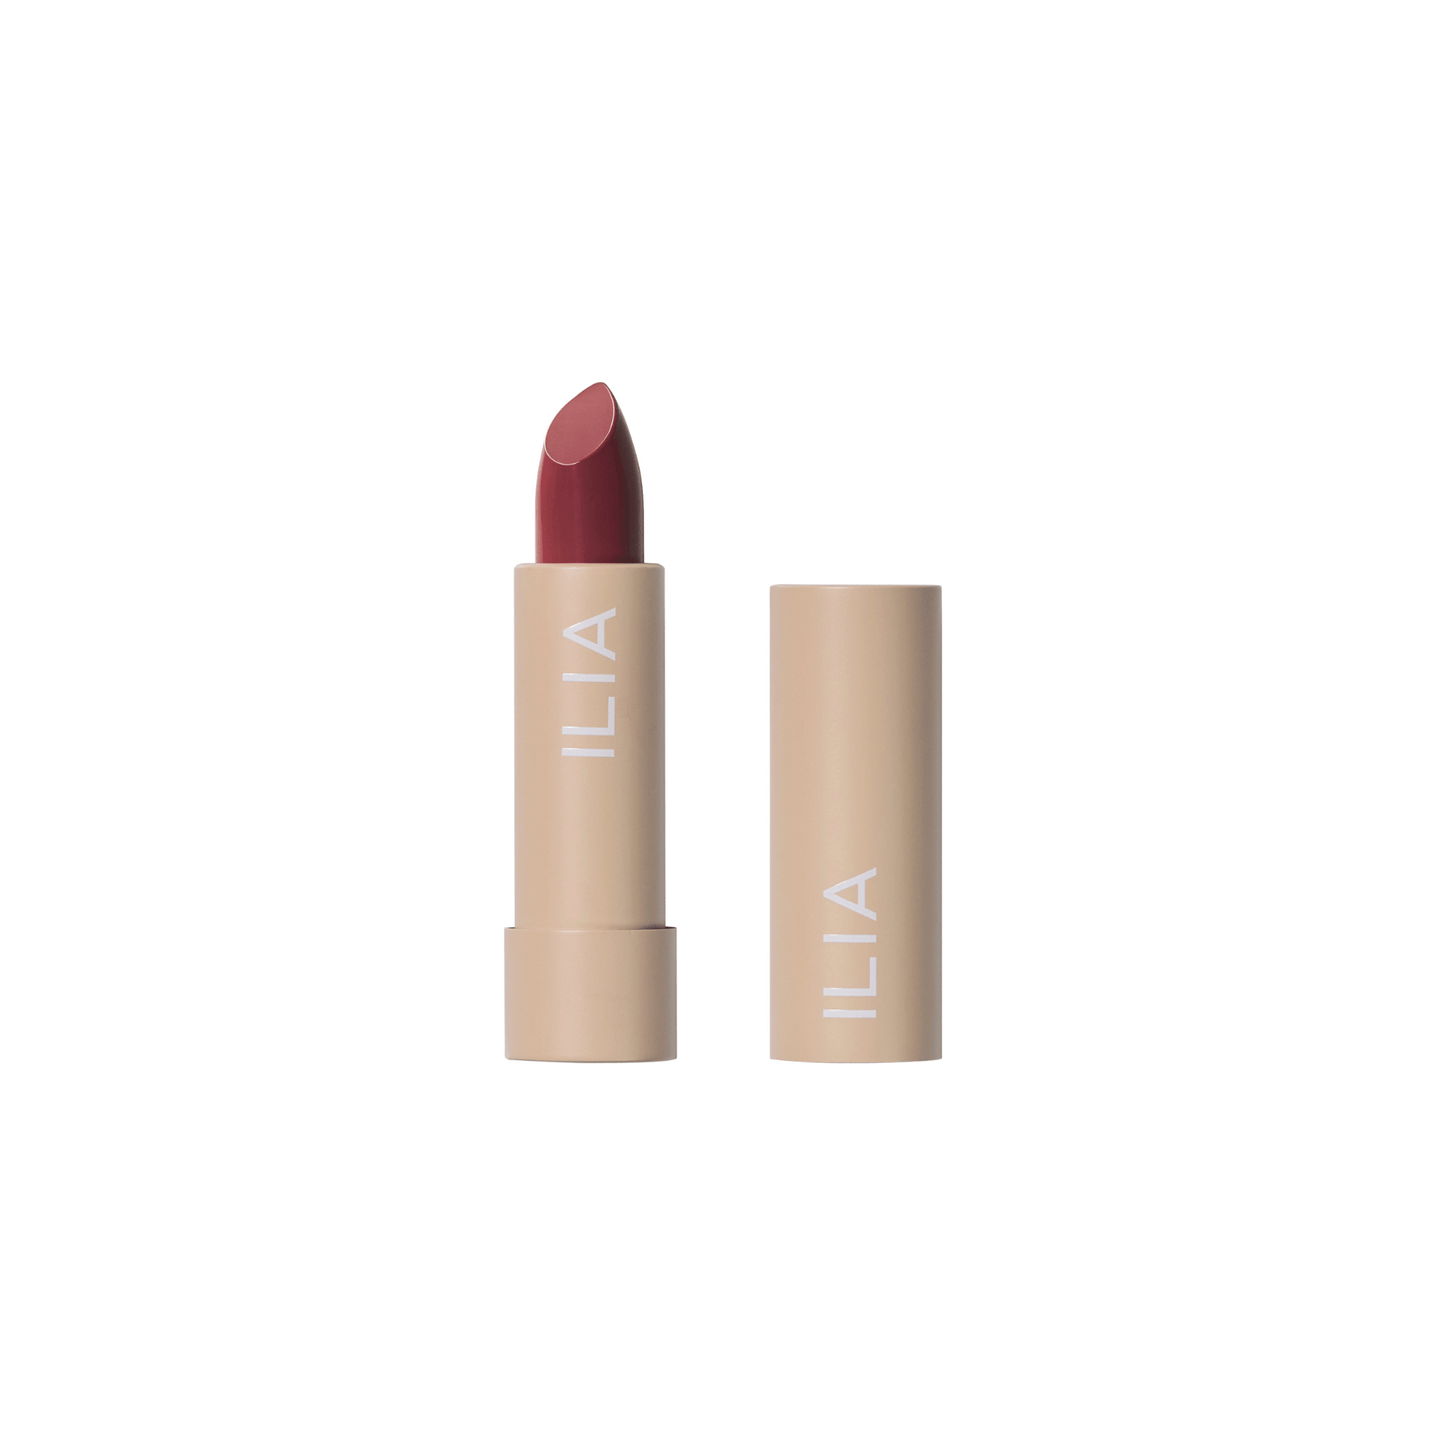 Primary Image of Color Block Lipstick in Wild Aster